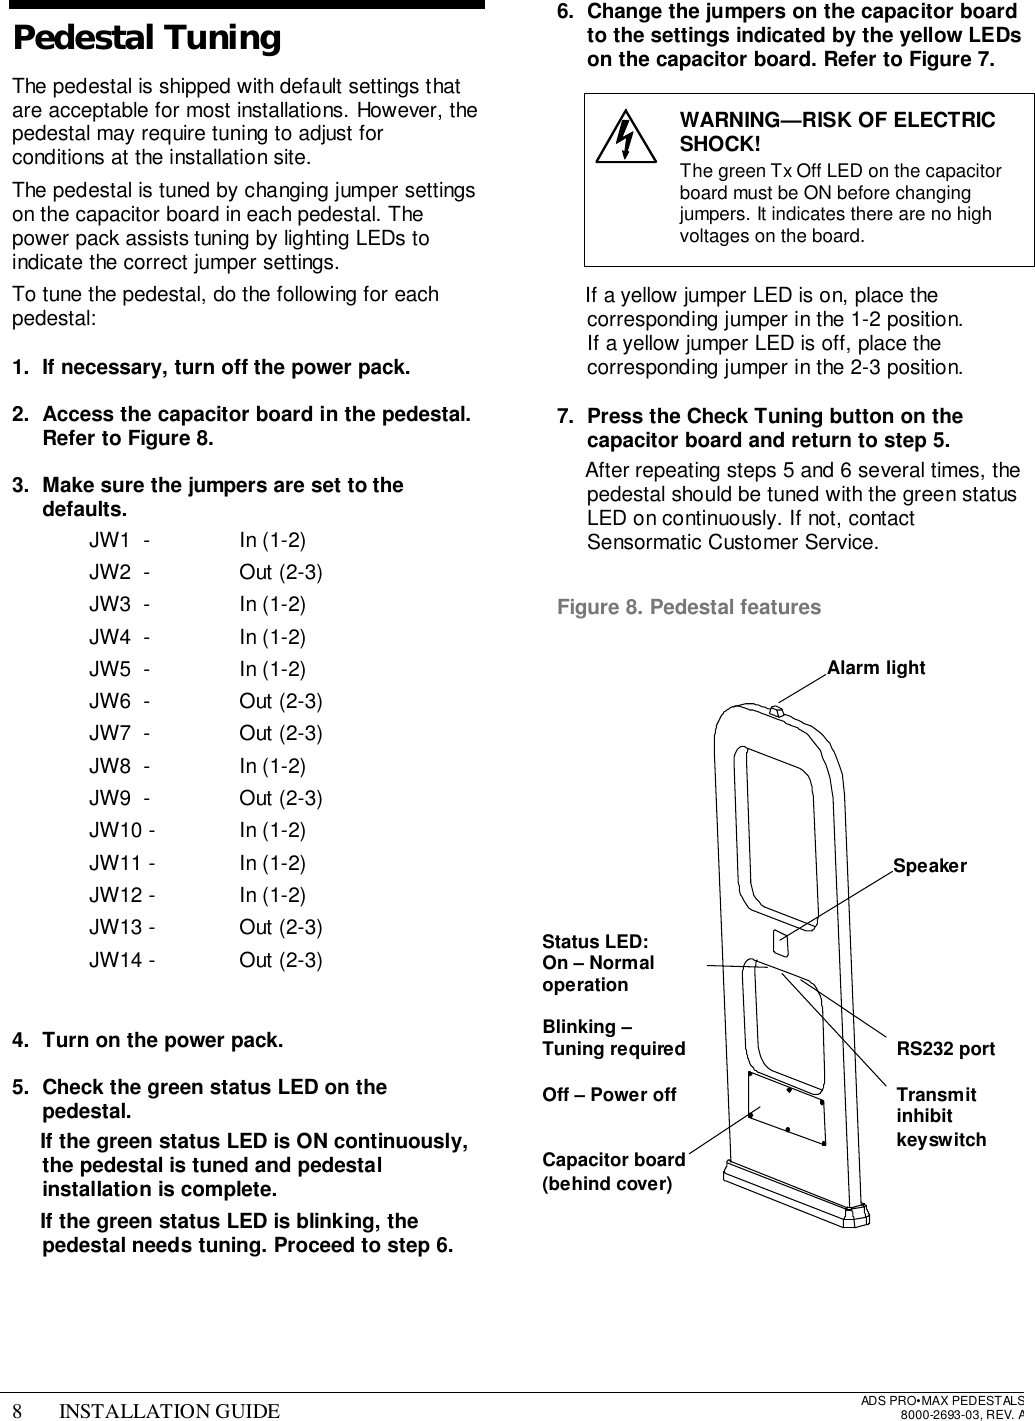 8 INSTALLATION GUIDE ADS PRO•MAX PEDESTALS8000-2693-03, REV. APedestal TuningThe pedestal is shipped with default settings thatare acceptable for most installations. However, thepedestal may require tuning to adjust forconditions at the installation site.The pedestal is tuned by changing jumper settingson the capacitor board in each pedestal. Thepower pack assists tuning by lighting LEDs toindicate the correct jumper settings.To tune the pedestal, do the following for eachpedestal:1.  If necessary, turn off the power pack.2.  Access the capacitor board in the pedestal.Refer to Figure 8.3.  Make sure the jumpers are set to thedefaults.  JW1  -   In (1-2)  JW2  -   Out (2-3)  JW3  -   In (1-2)  JW4  -   In (1-2)  JW5  -   In (1-2)  JW6  -   Out (2-3)  JW7  -   Out (2-3)  JW8  -   In (1-2)  JW9  -   Out (2-3) JW10 -  In (1-2) JW11 -  In (1-2) JW12 -  In (1-2) JW13 -  Out (2-3) JW14 -  Out (2-3) 4.  Turn on the power pack.5.  Check the green status LED on thepedestal. If the green status LED is ON continuously,the pedestal is tuned and pedestalinstallation is complete. If the green status LED is blinking, thepedestal needs tuning. Proceed to step 6.6.  Change the jumpers on the capacitor boardto the settings indicated by the yellow LEDson the capacitor board. Refer to Figure 7.WARNING—RISK OF ELECTRICSHOCK!The green Tx Off LED on the capacitorboard must be ON before changingjumpers. It indicates there are no highvoltages on the board.  If a yellow jumper LED is on, place thecorresponding jumper in the 1-2 position.If a yellow jumper LED is off, place thecorresponding jumper in the 2-3 position.7.  Press the Check Tuning button on thecapacitor board and return to step 5.  After repeating steps 5 and 6 several times, thepedestal should be tuned with the green statusLED on continuously. If not, contactSensormatic Customer Service. Figure 8. Pedestal featuresAlarm lightSpeakerTransmitinhibitkeyswitchRS232 portStatus LED:On – NormaloperationBlinking –Tuning requiredOff – Power offCapacitor board(behind cover)